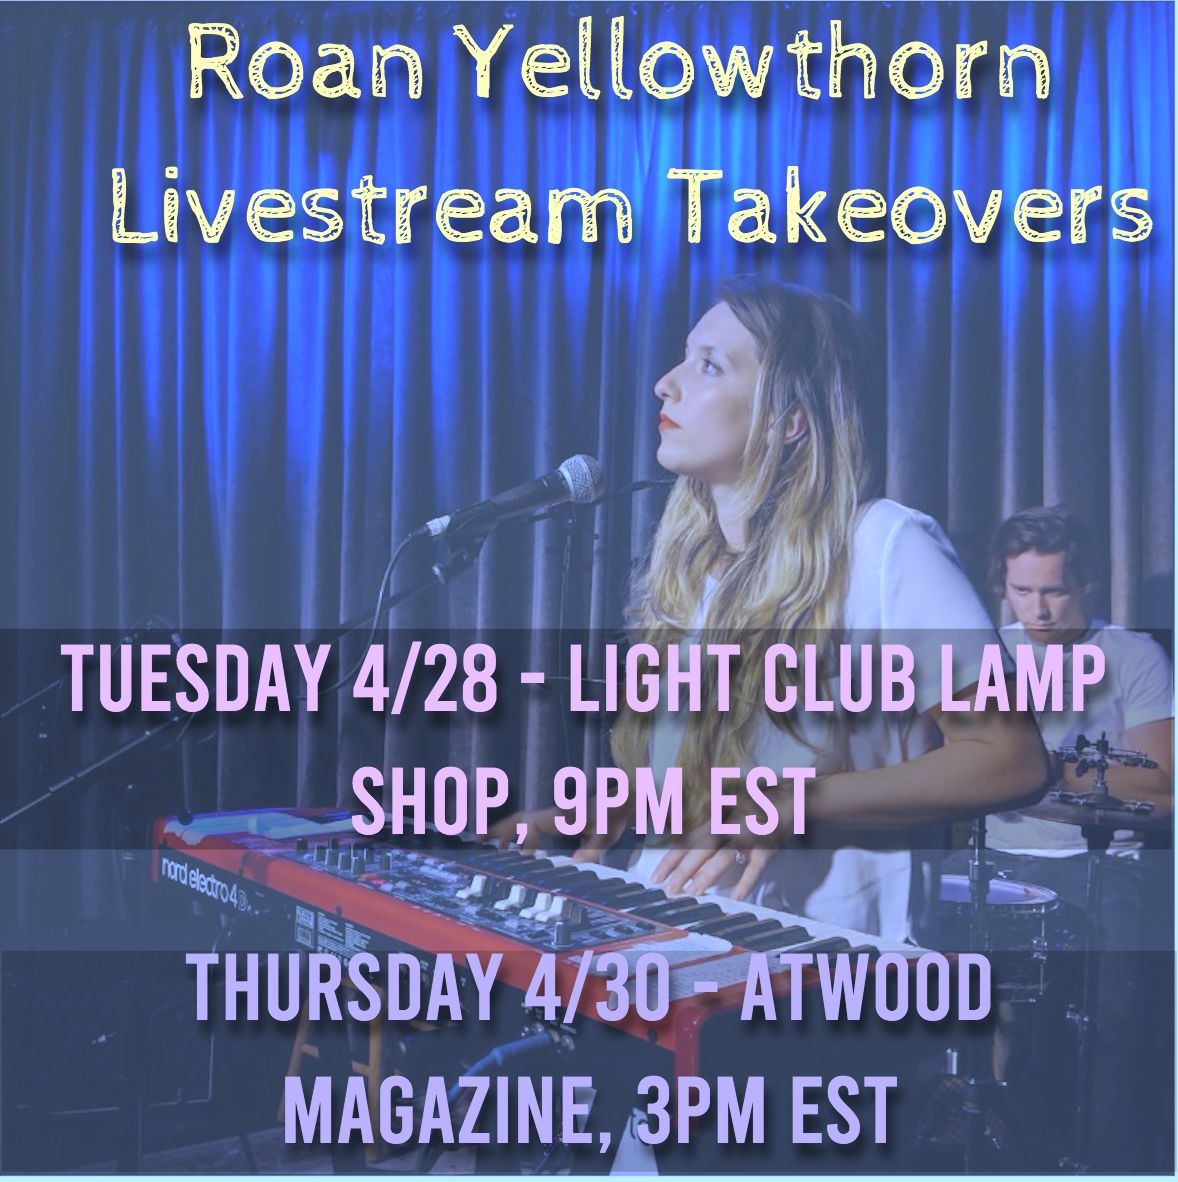 Roan Yellowthorn's upcoming takeovers